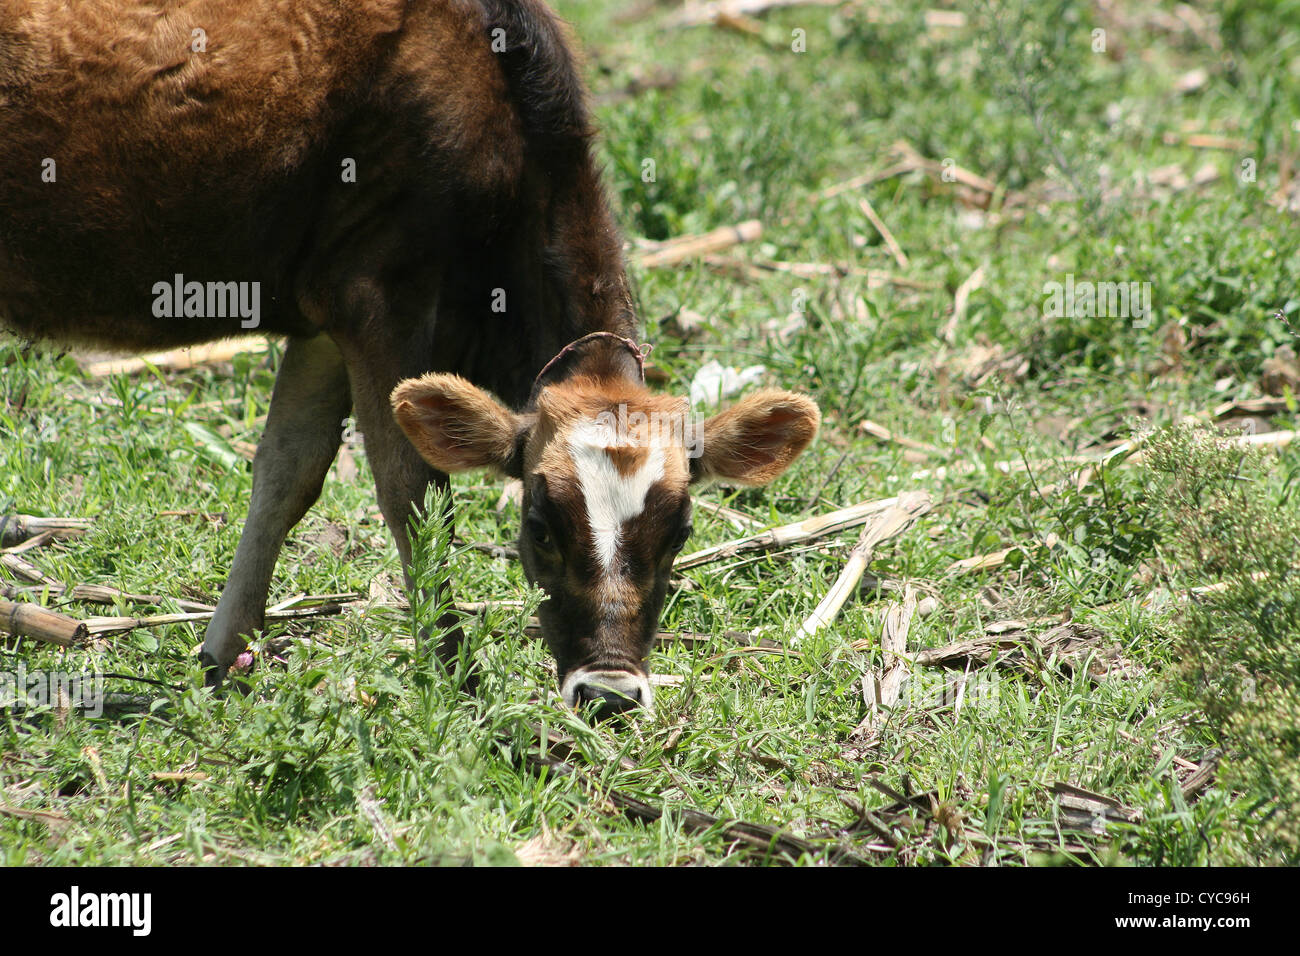 A young brown calf grazing on grass and corn stalks in a farmers meadow in Cotacachi, Ecuador Stock Photo